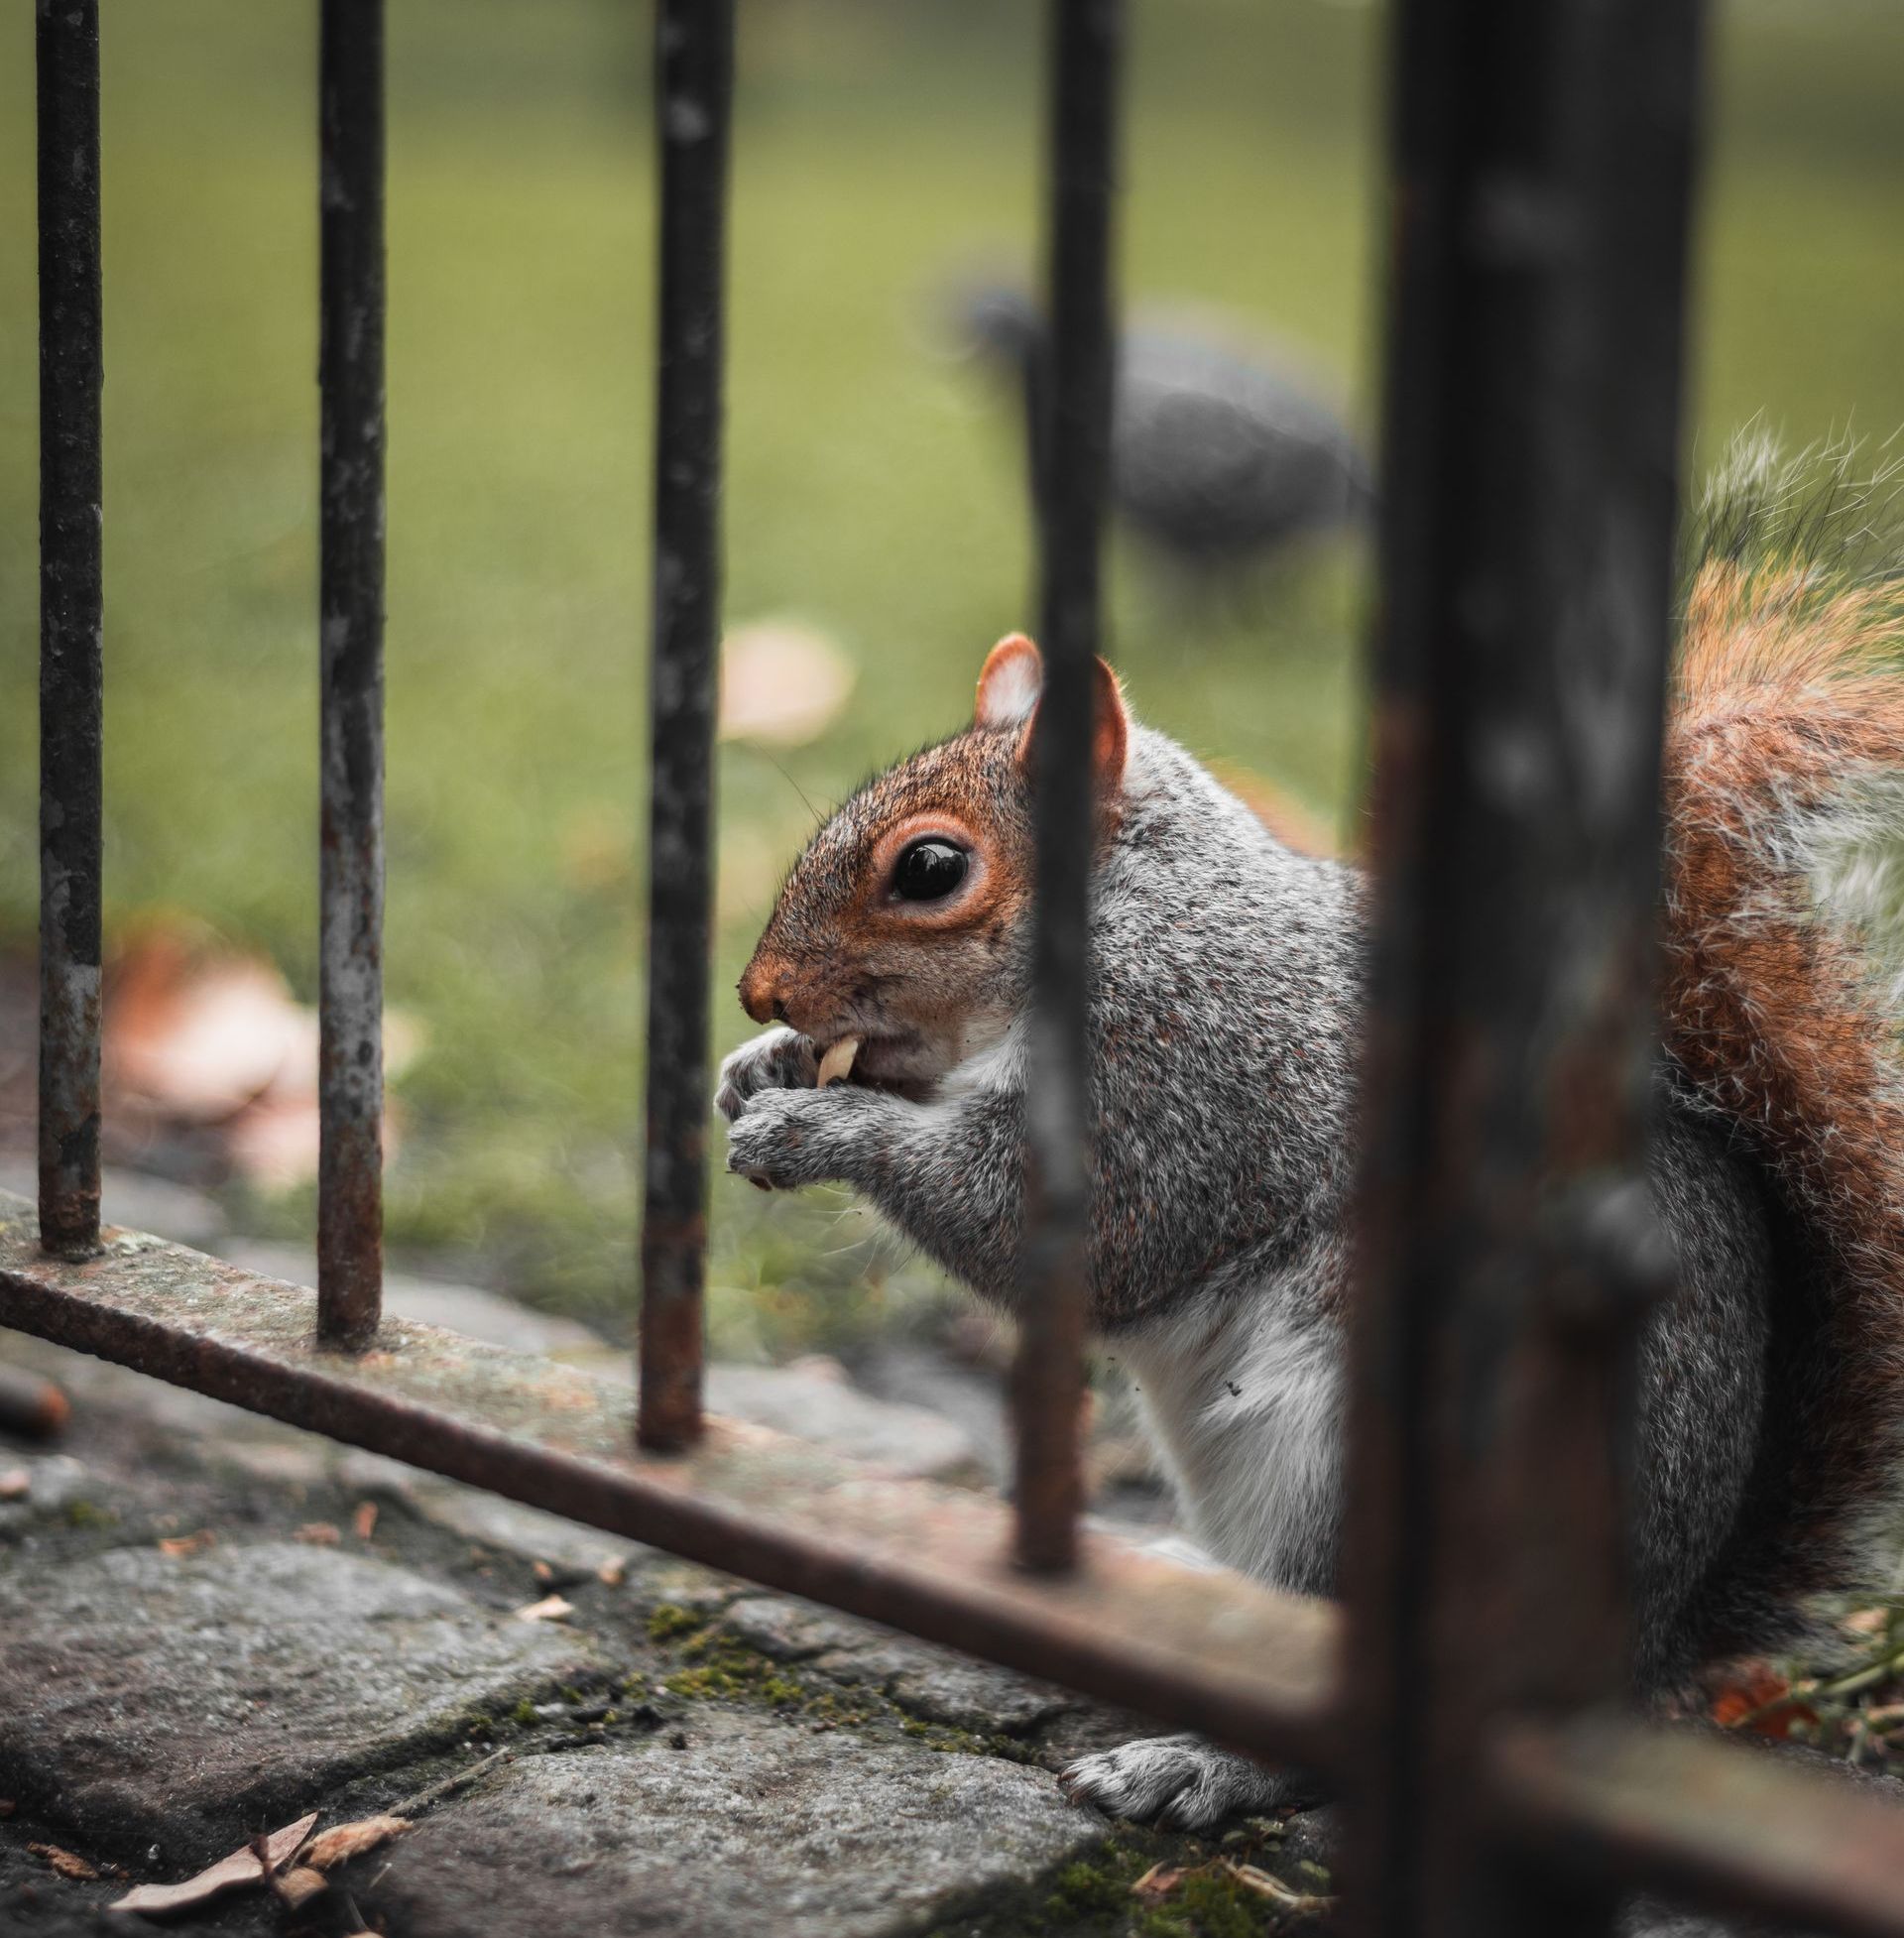 a squirrel eating a nut behind a metal fence